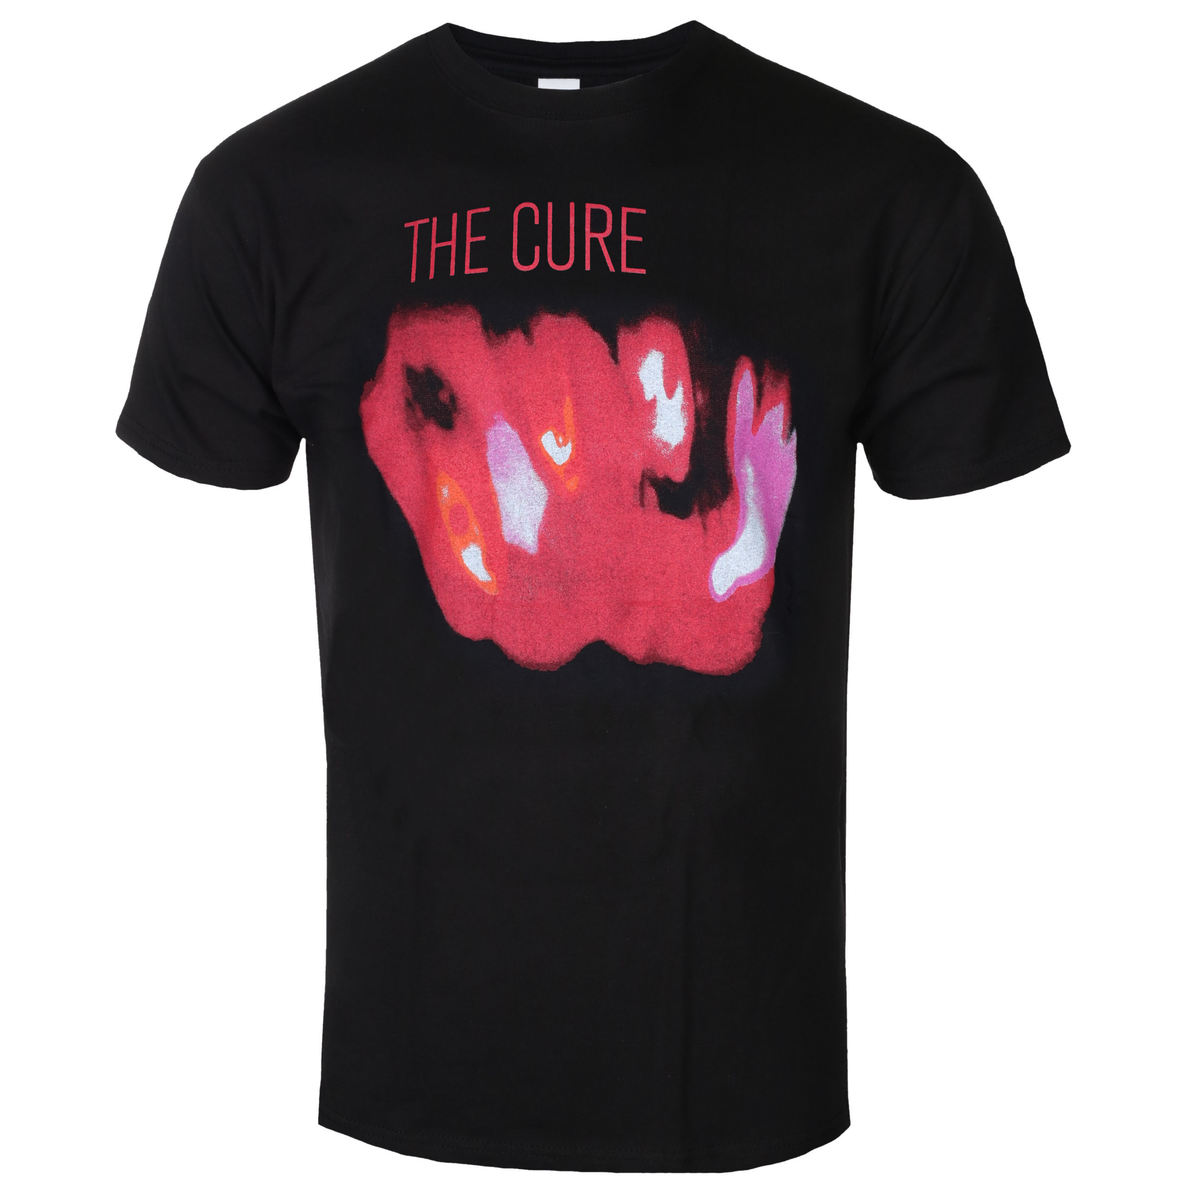 The Cure - Pornography (Large)